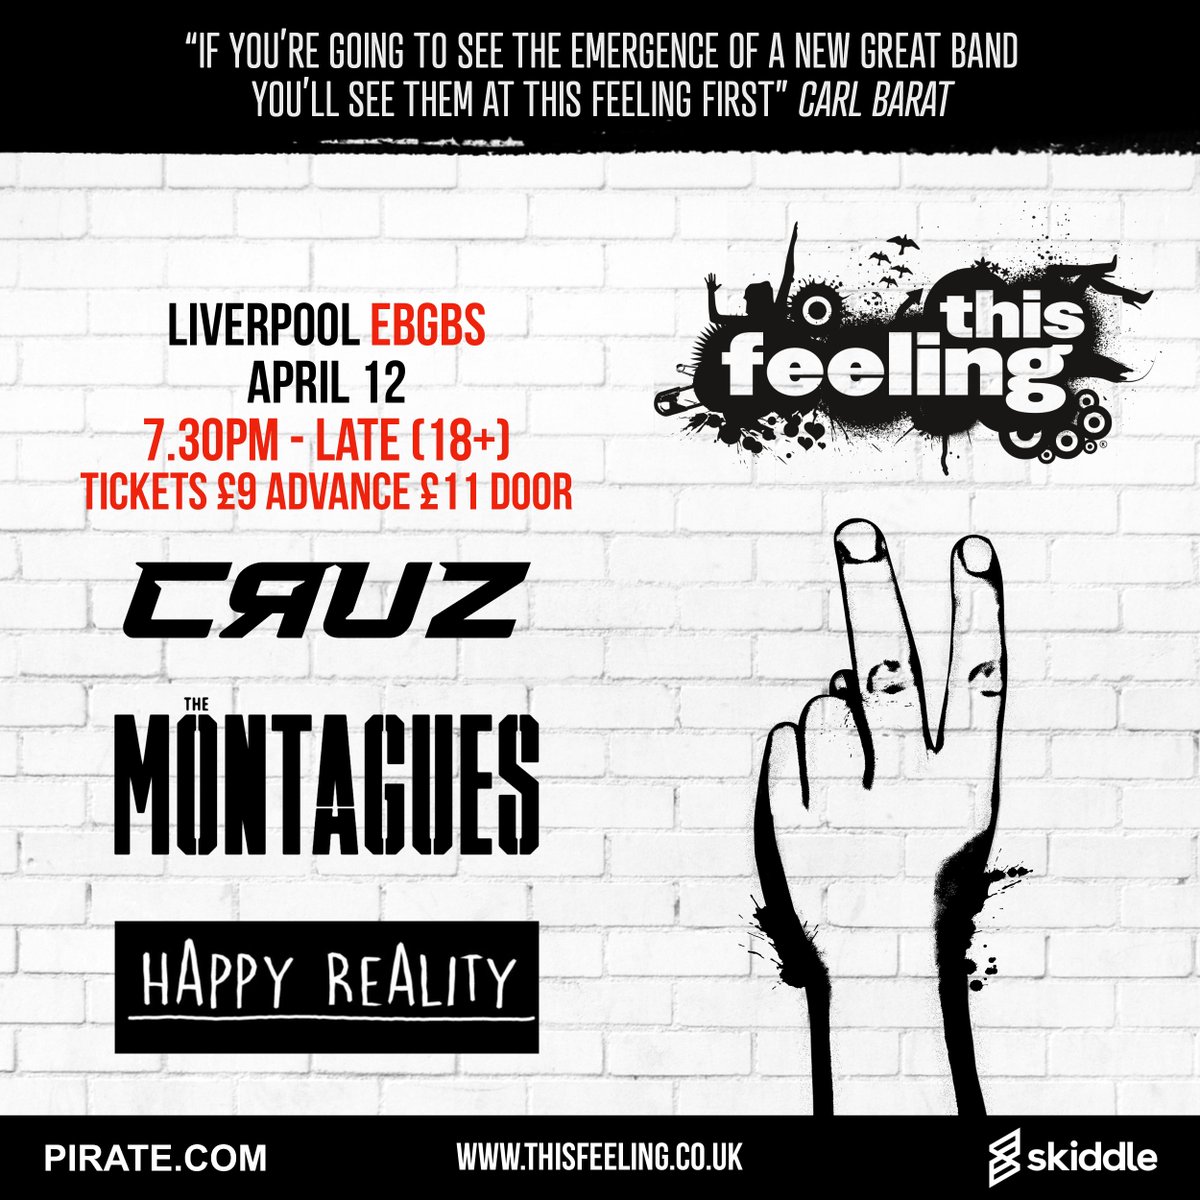 Coming up this week : Friday 🎸 Liverpool @ebgbsliverpool ft. @band_cruz @montaguesmusic & #HappyReality 🎟 skiddle.com/whats-on/Liver… 🎶open.spotify.com/playlist/4ZNgT…